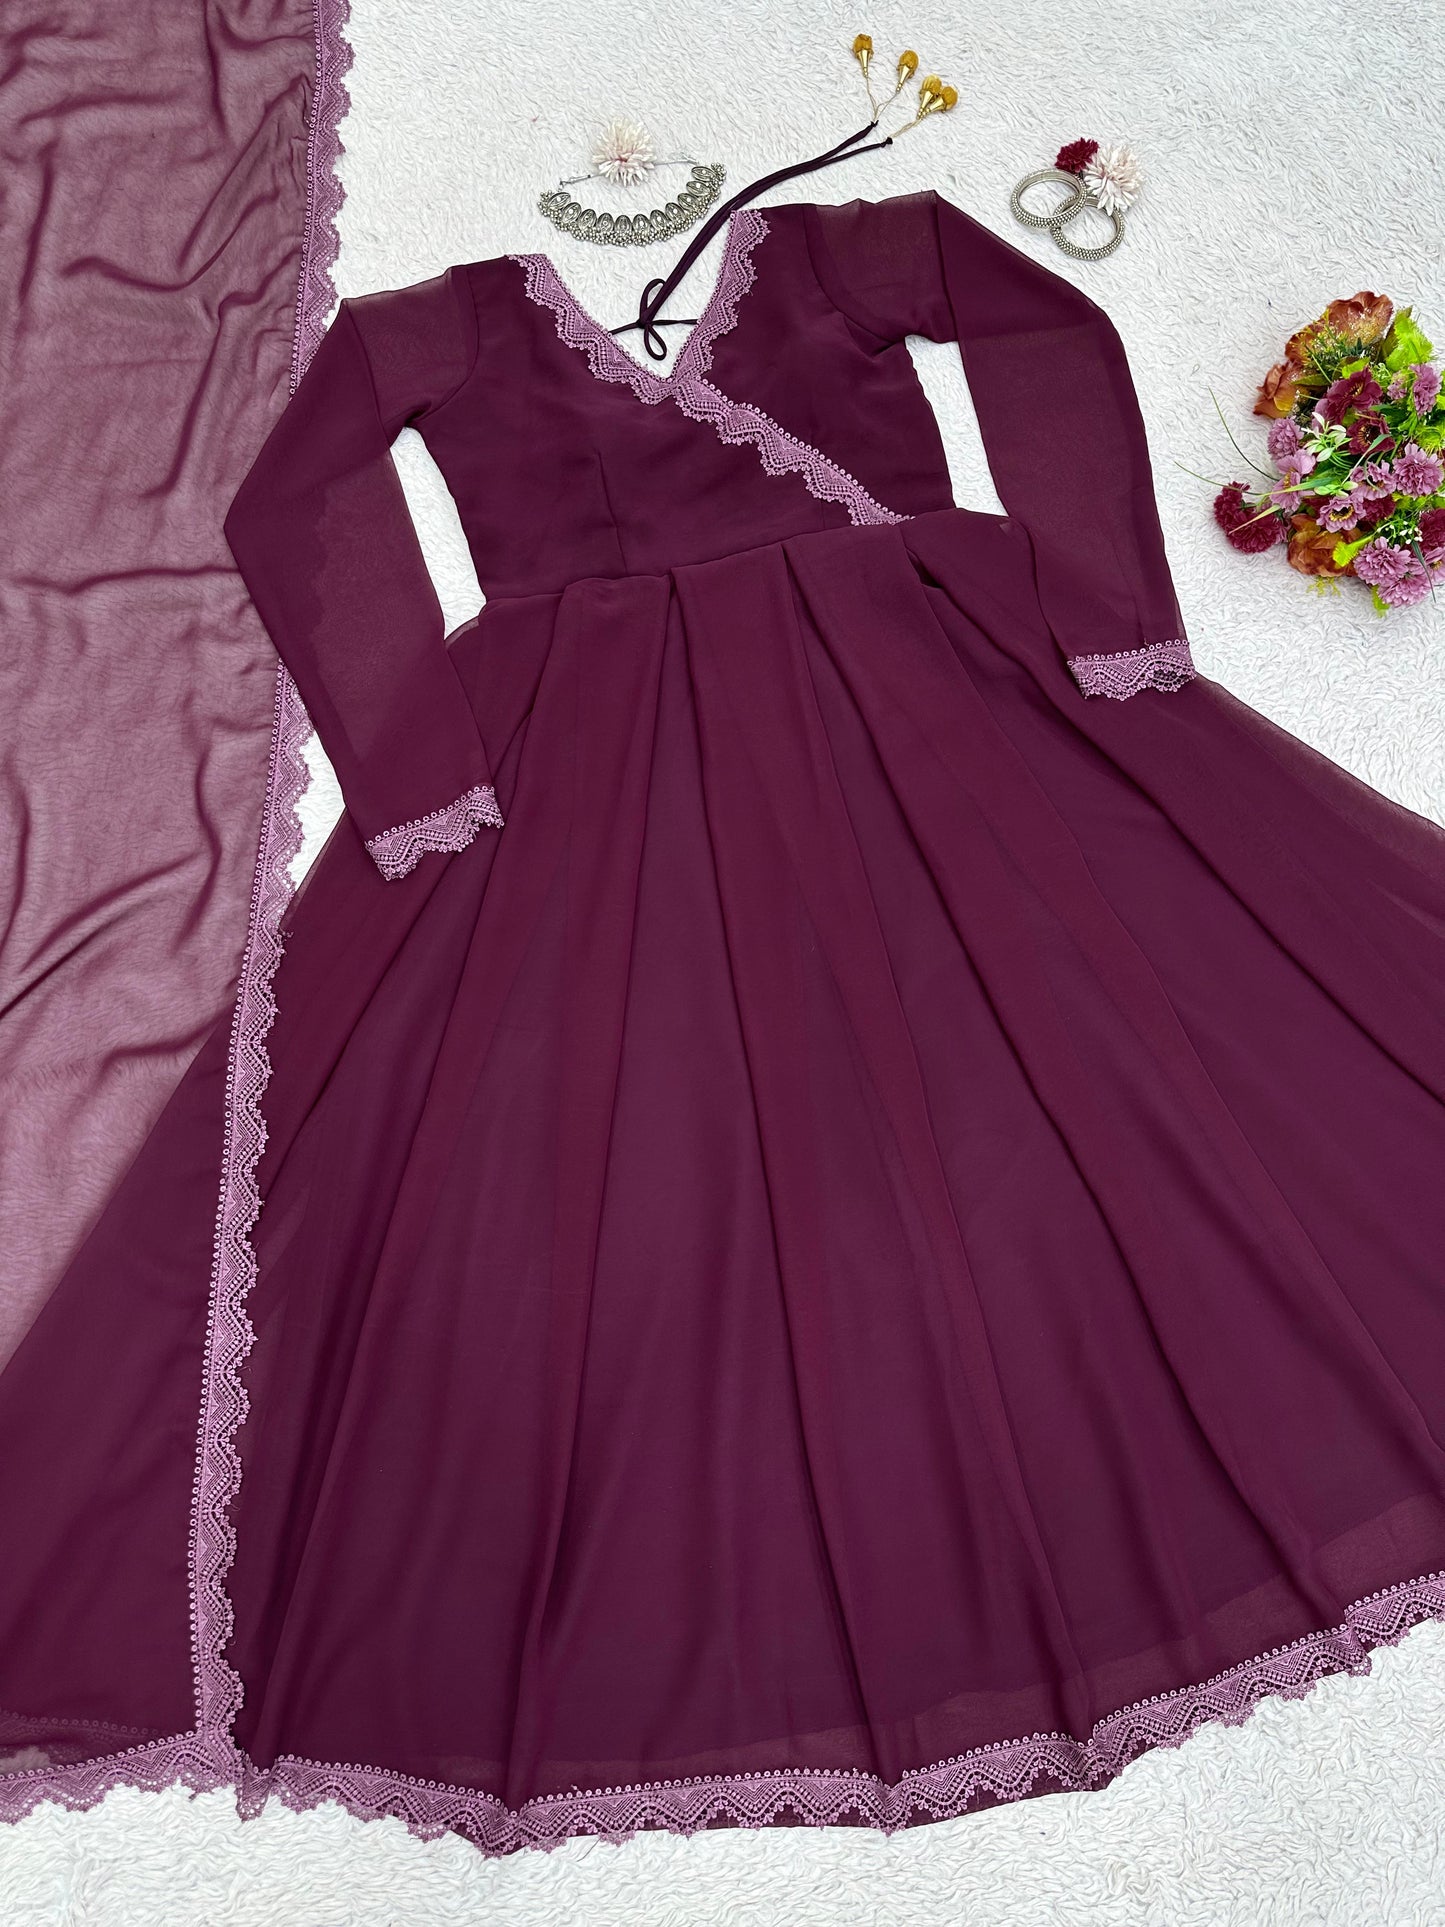 Buy Latest Wine Color Indian Gown Online at Best Price